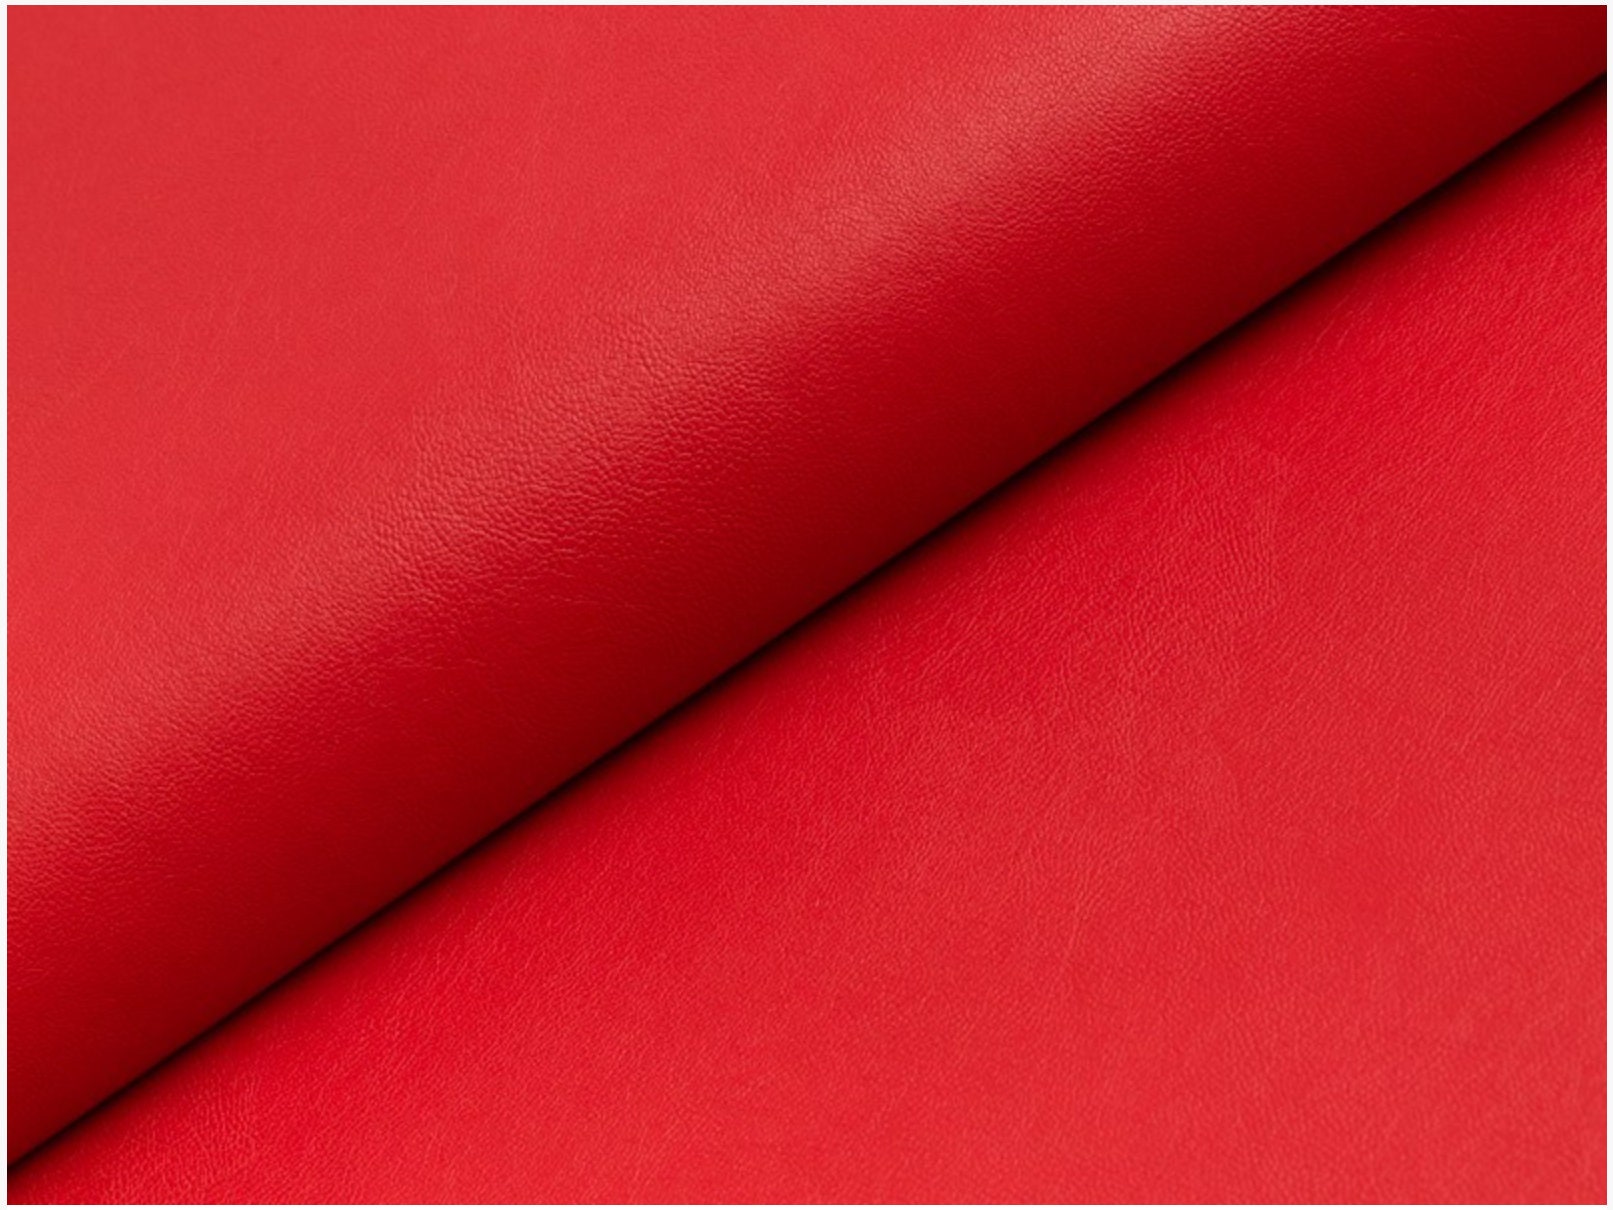 Self-adhesive Leather Fabric, Artificial Leather, Sofa Leather Fabric,  Leather Sheets, Band-aid Faux Leather Fabric, by the Half Yard 